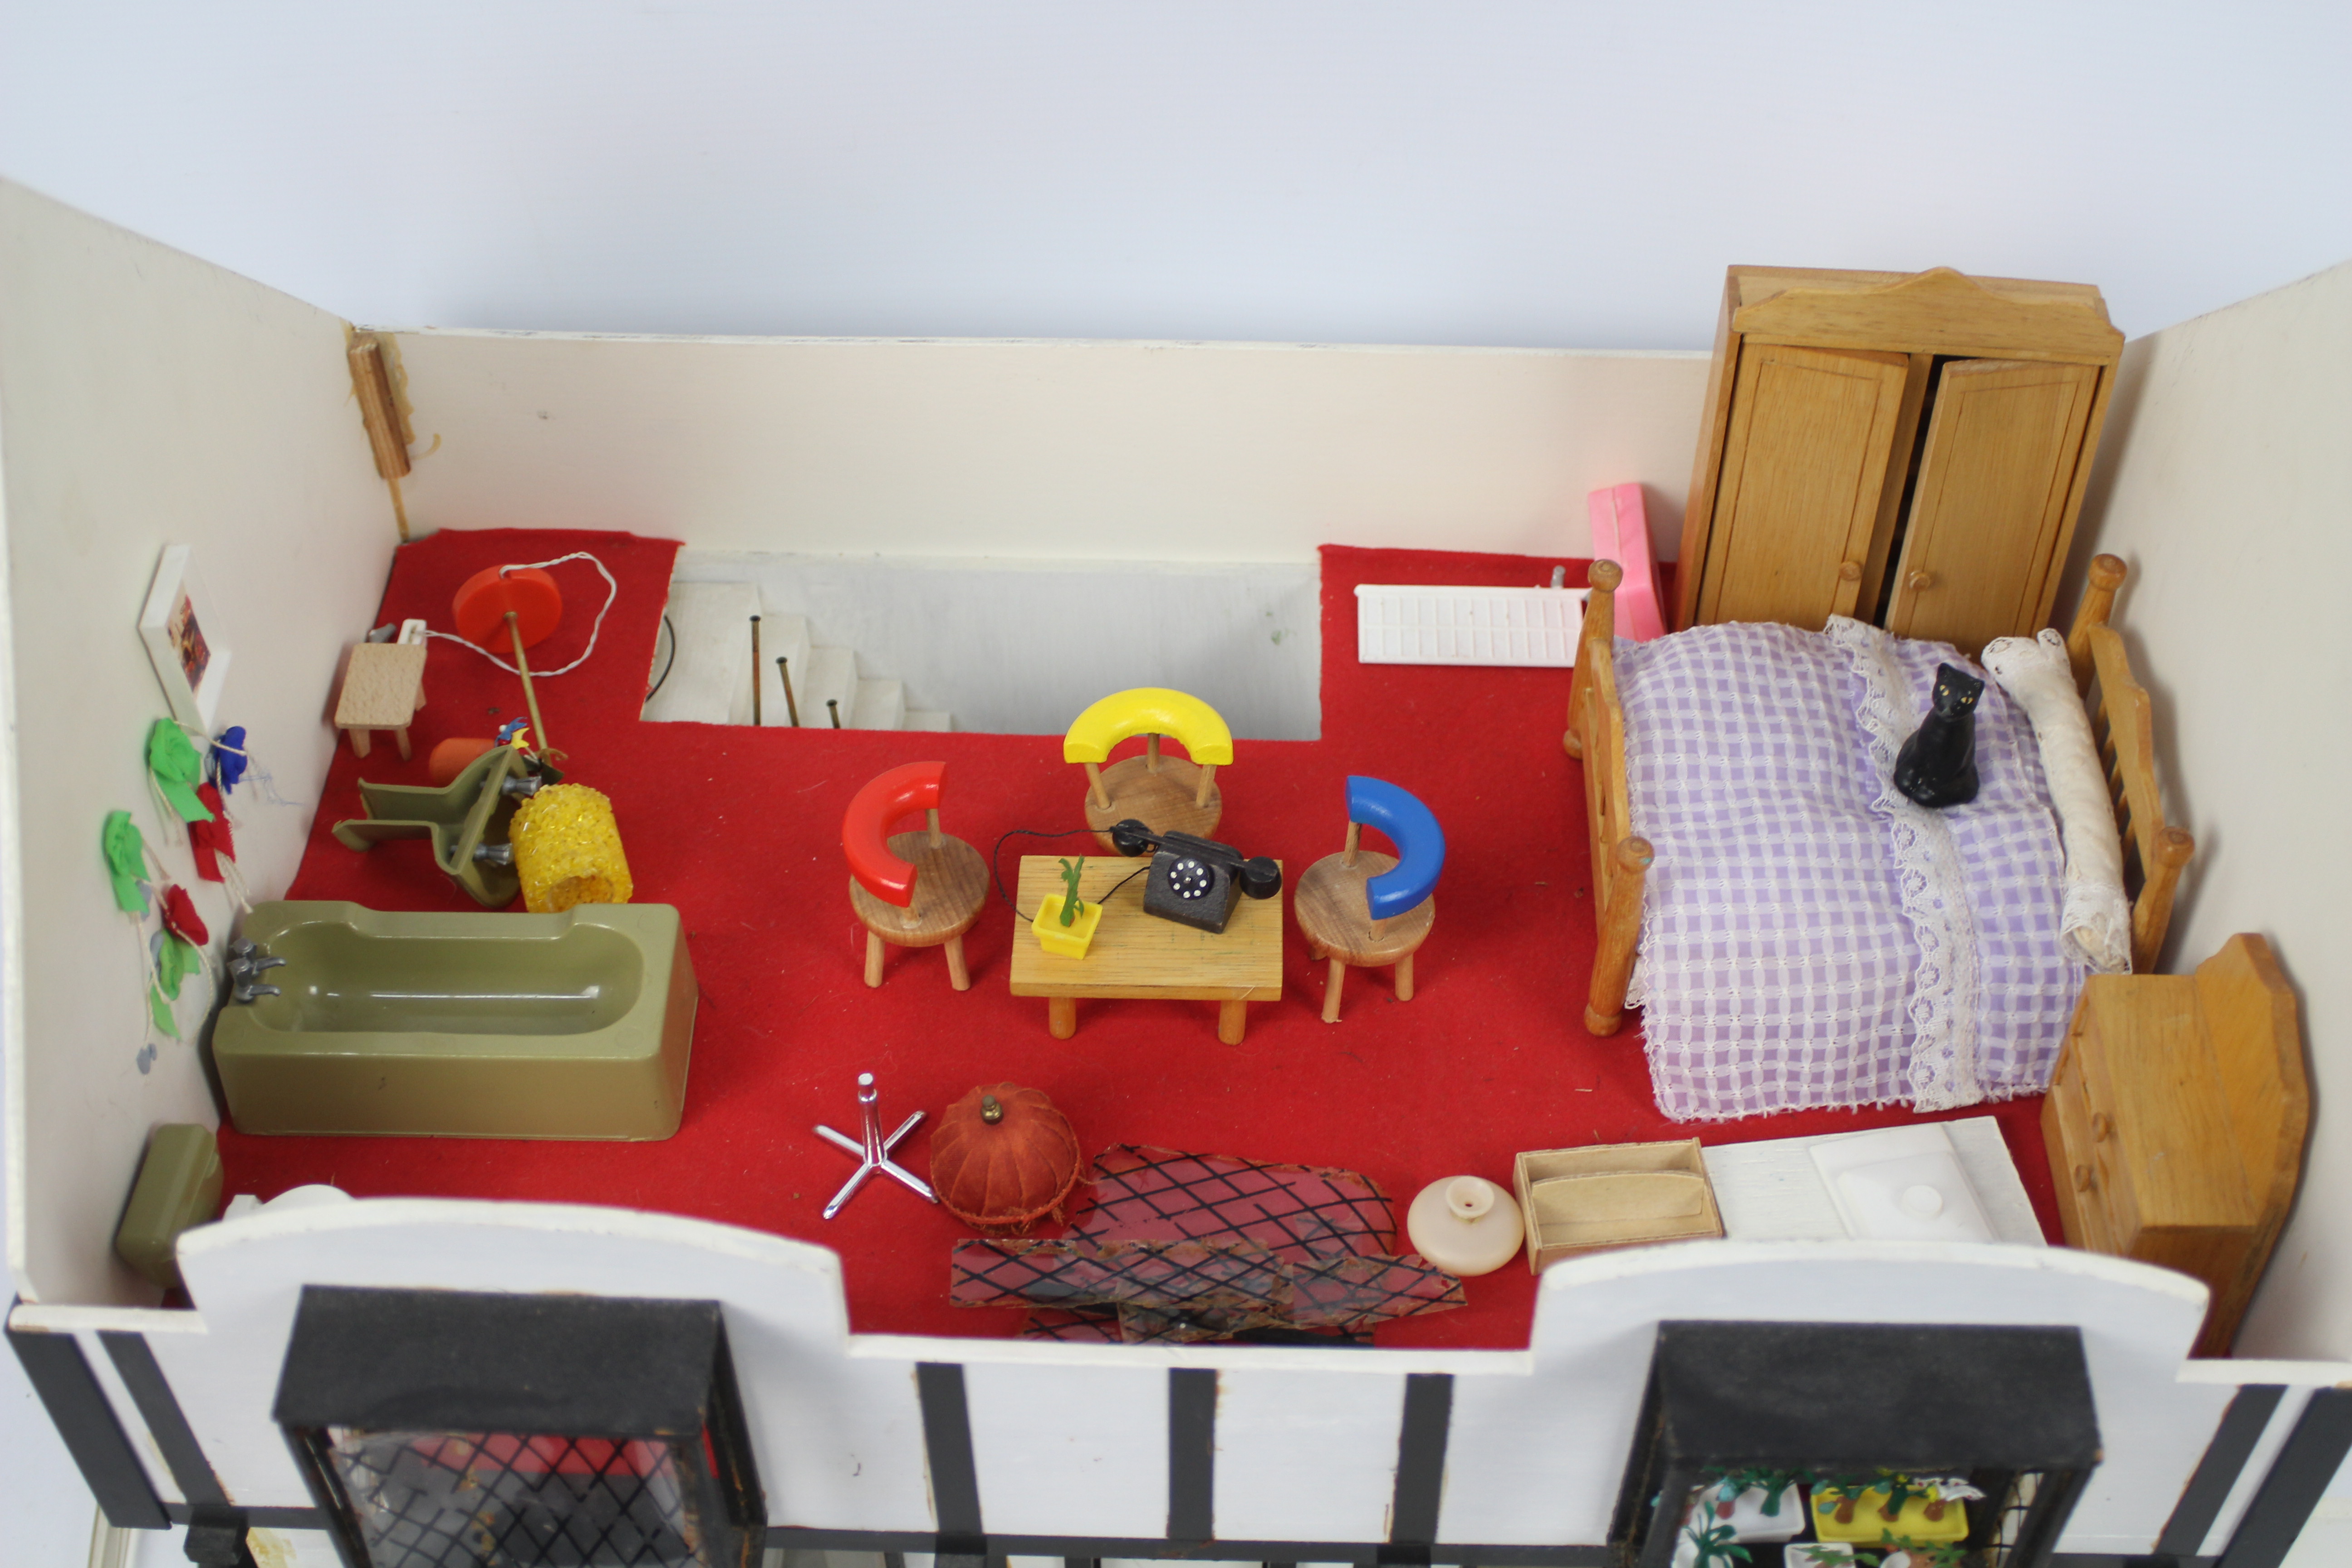 Dolls house - A home made, wooden, thatched, dolls house with electricity fittings for lights. - Image 3 of 4